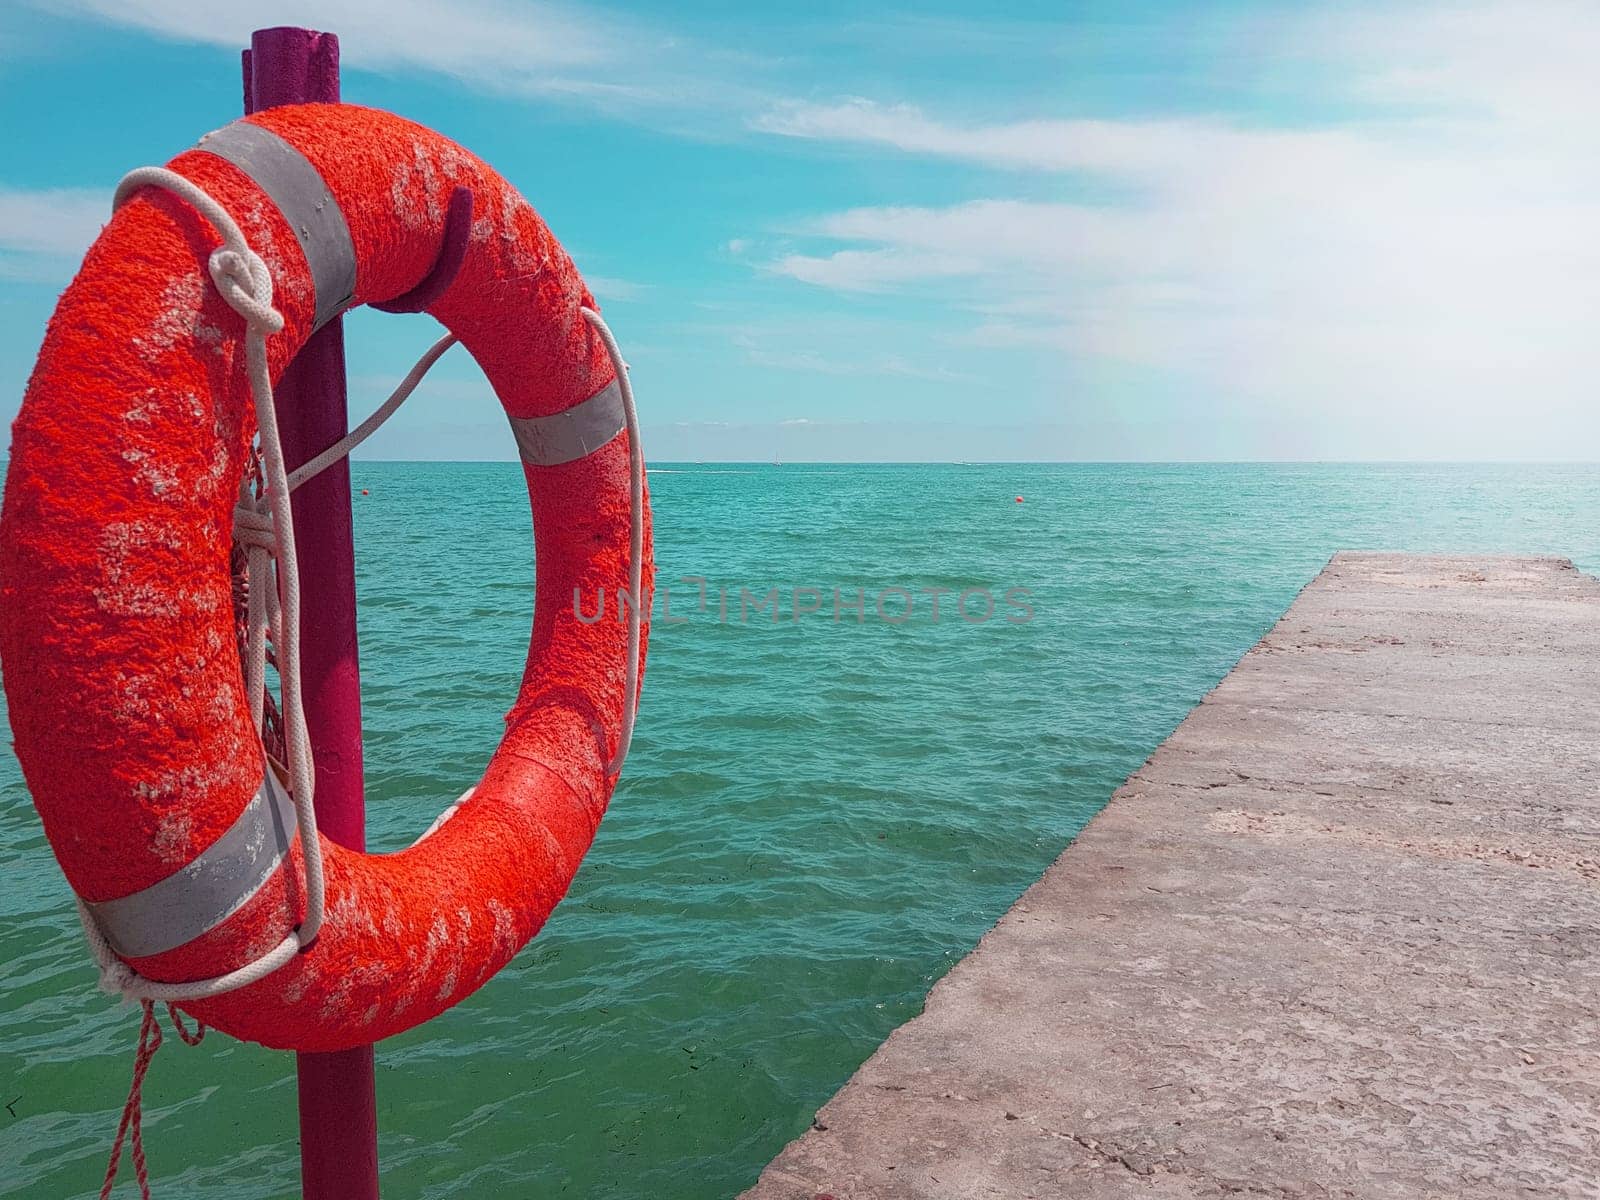 Lifebuoy on the background of the azure sea, sea pier in the sea, close-up, place for text.